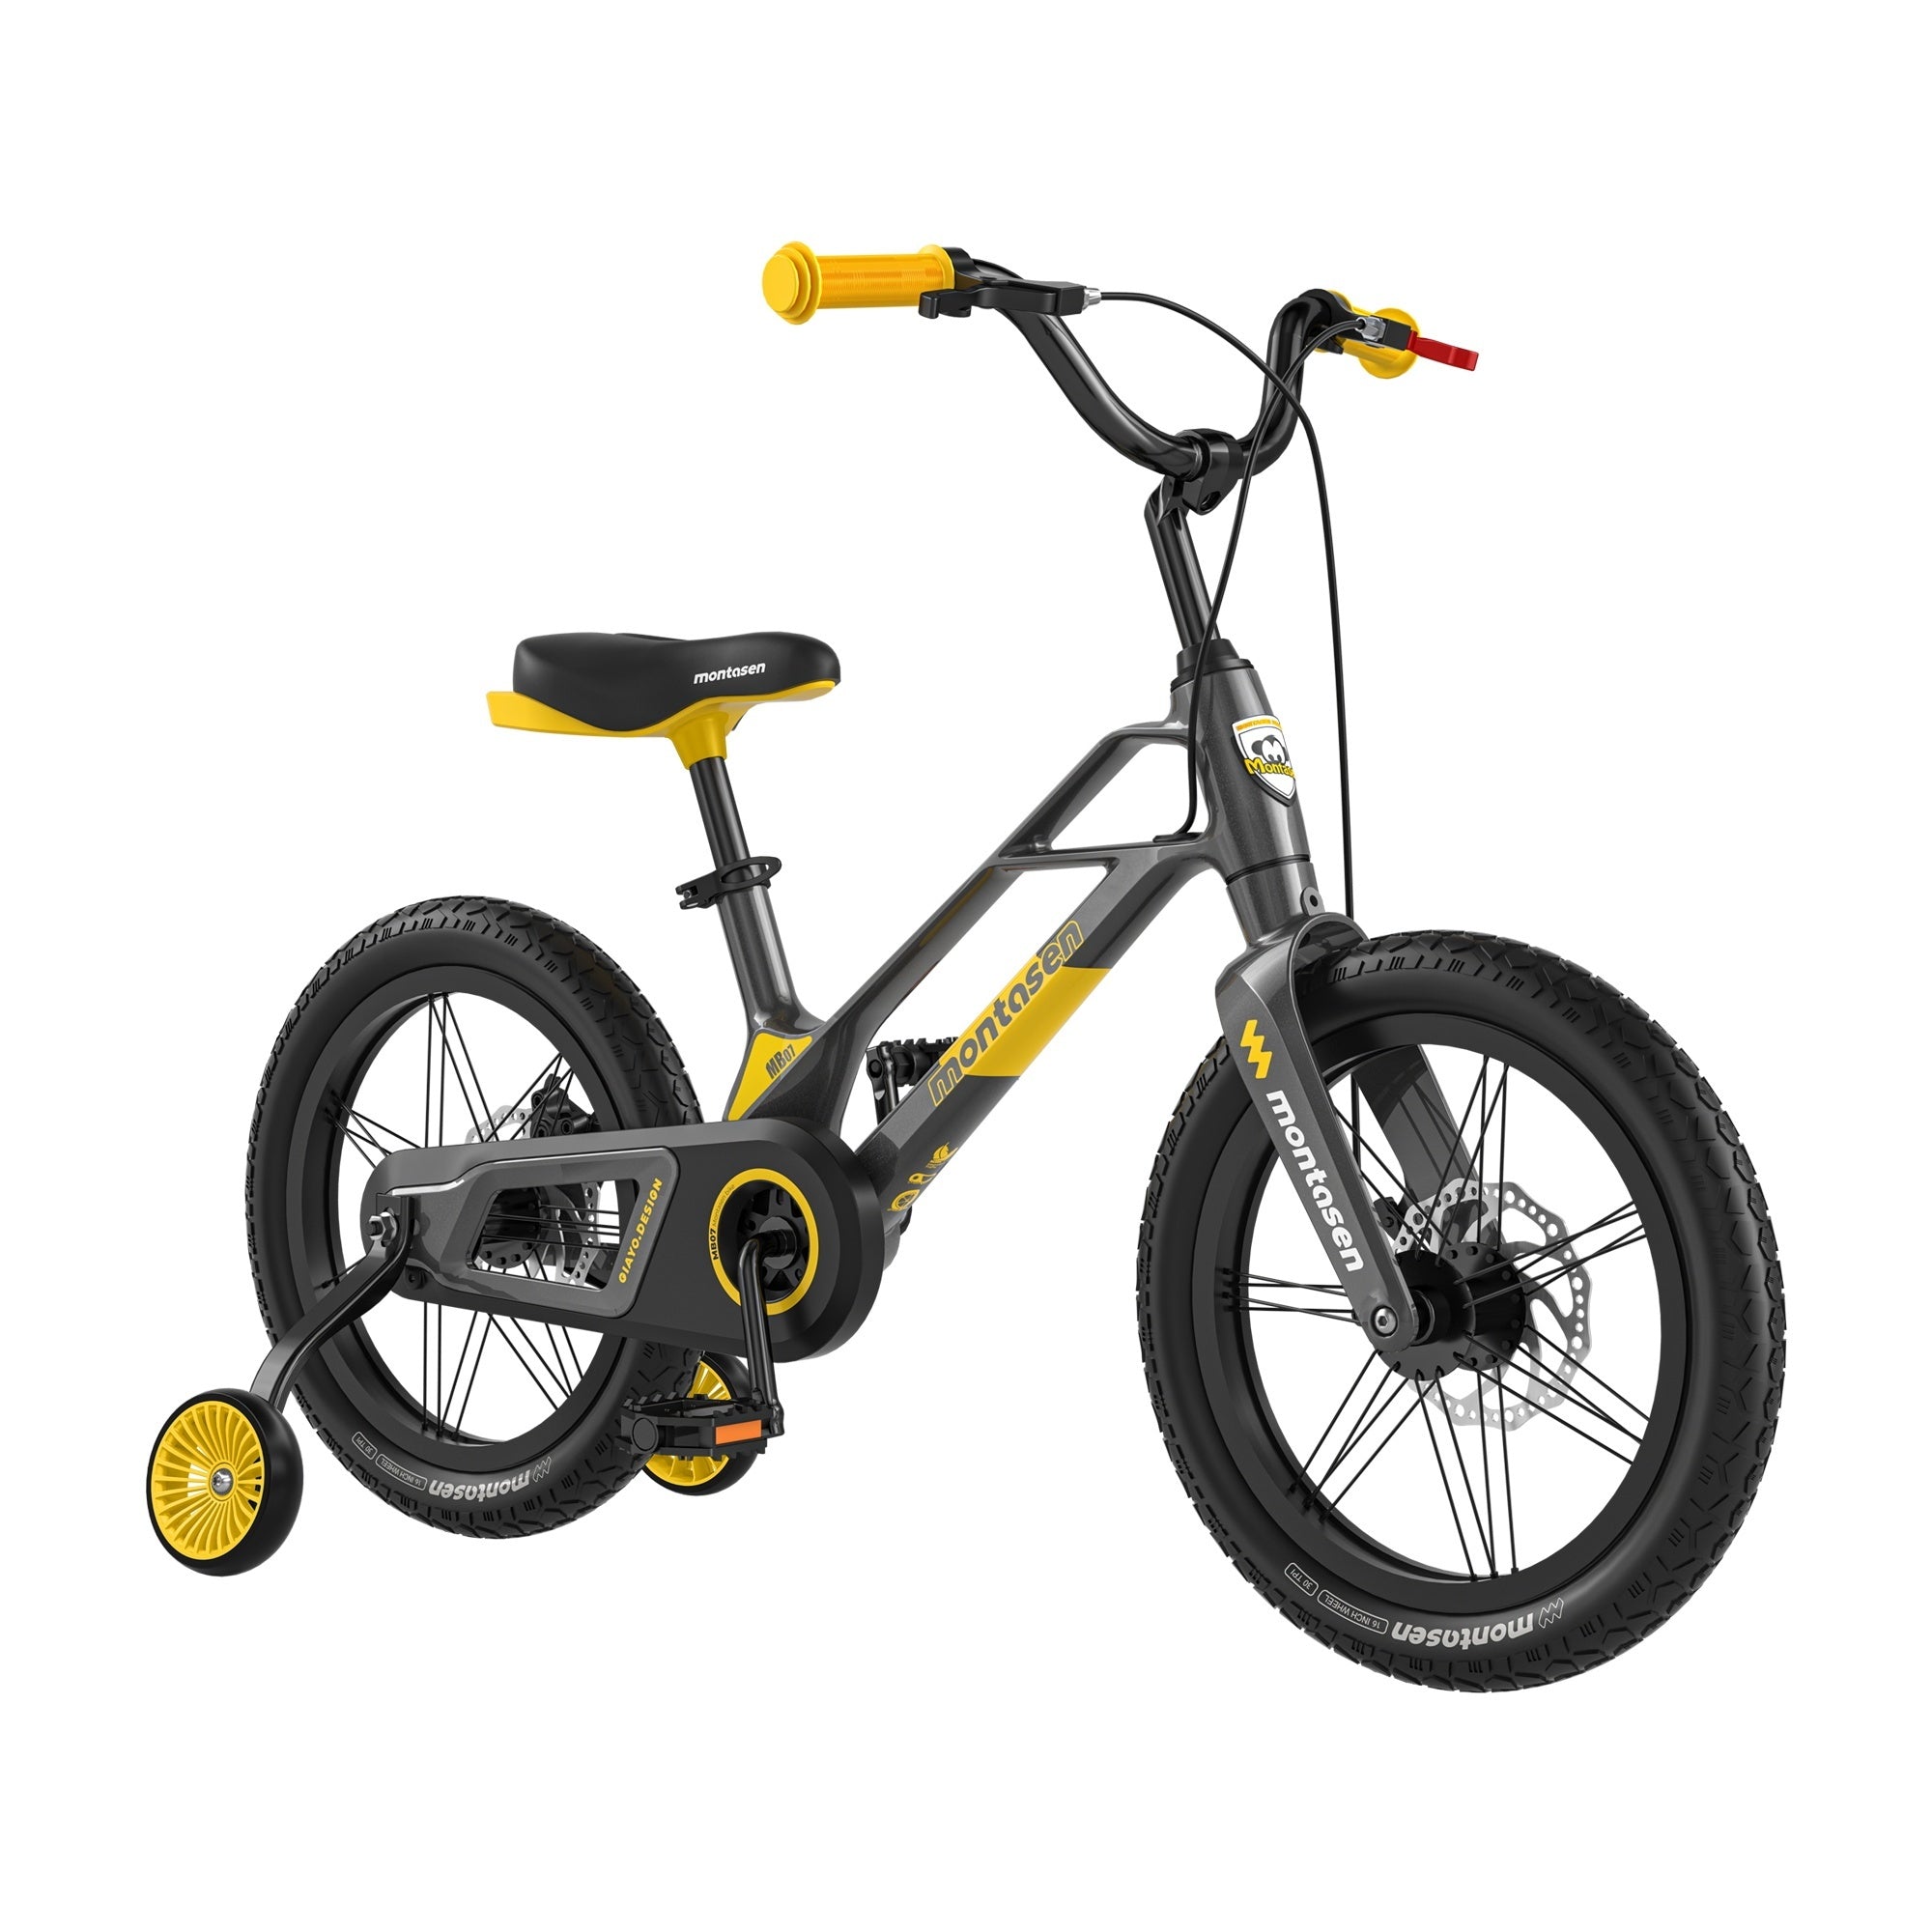 Montasen-Kids-Bike-16-Inch-Bicycle-for-Boys-Girls-Ages-4-8-Years,-Lightweight-Magnesium-Alloy-Frame,-Disc-Adjustable-Handlebar-Training-Wheels-Gray-Yellow-Color-